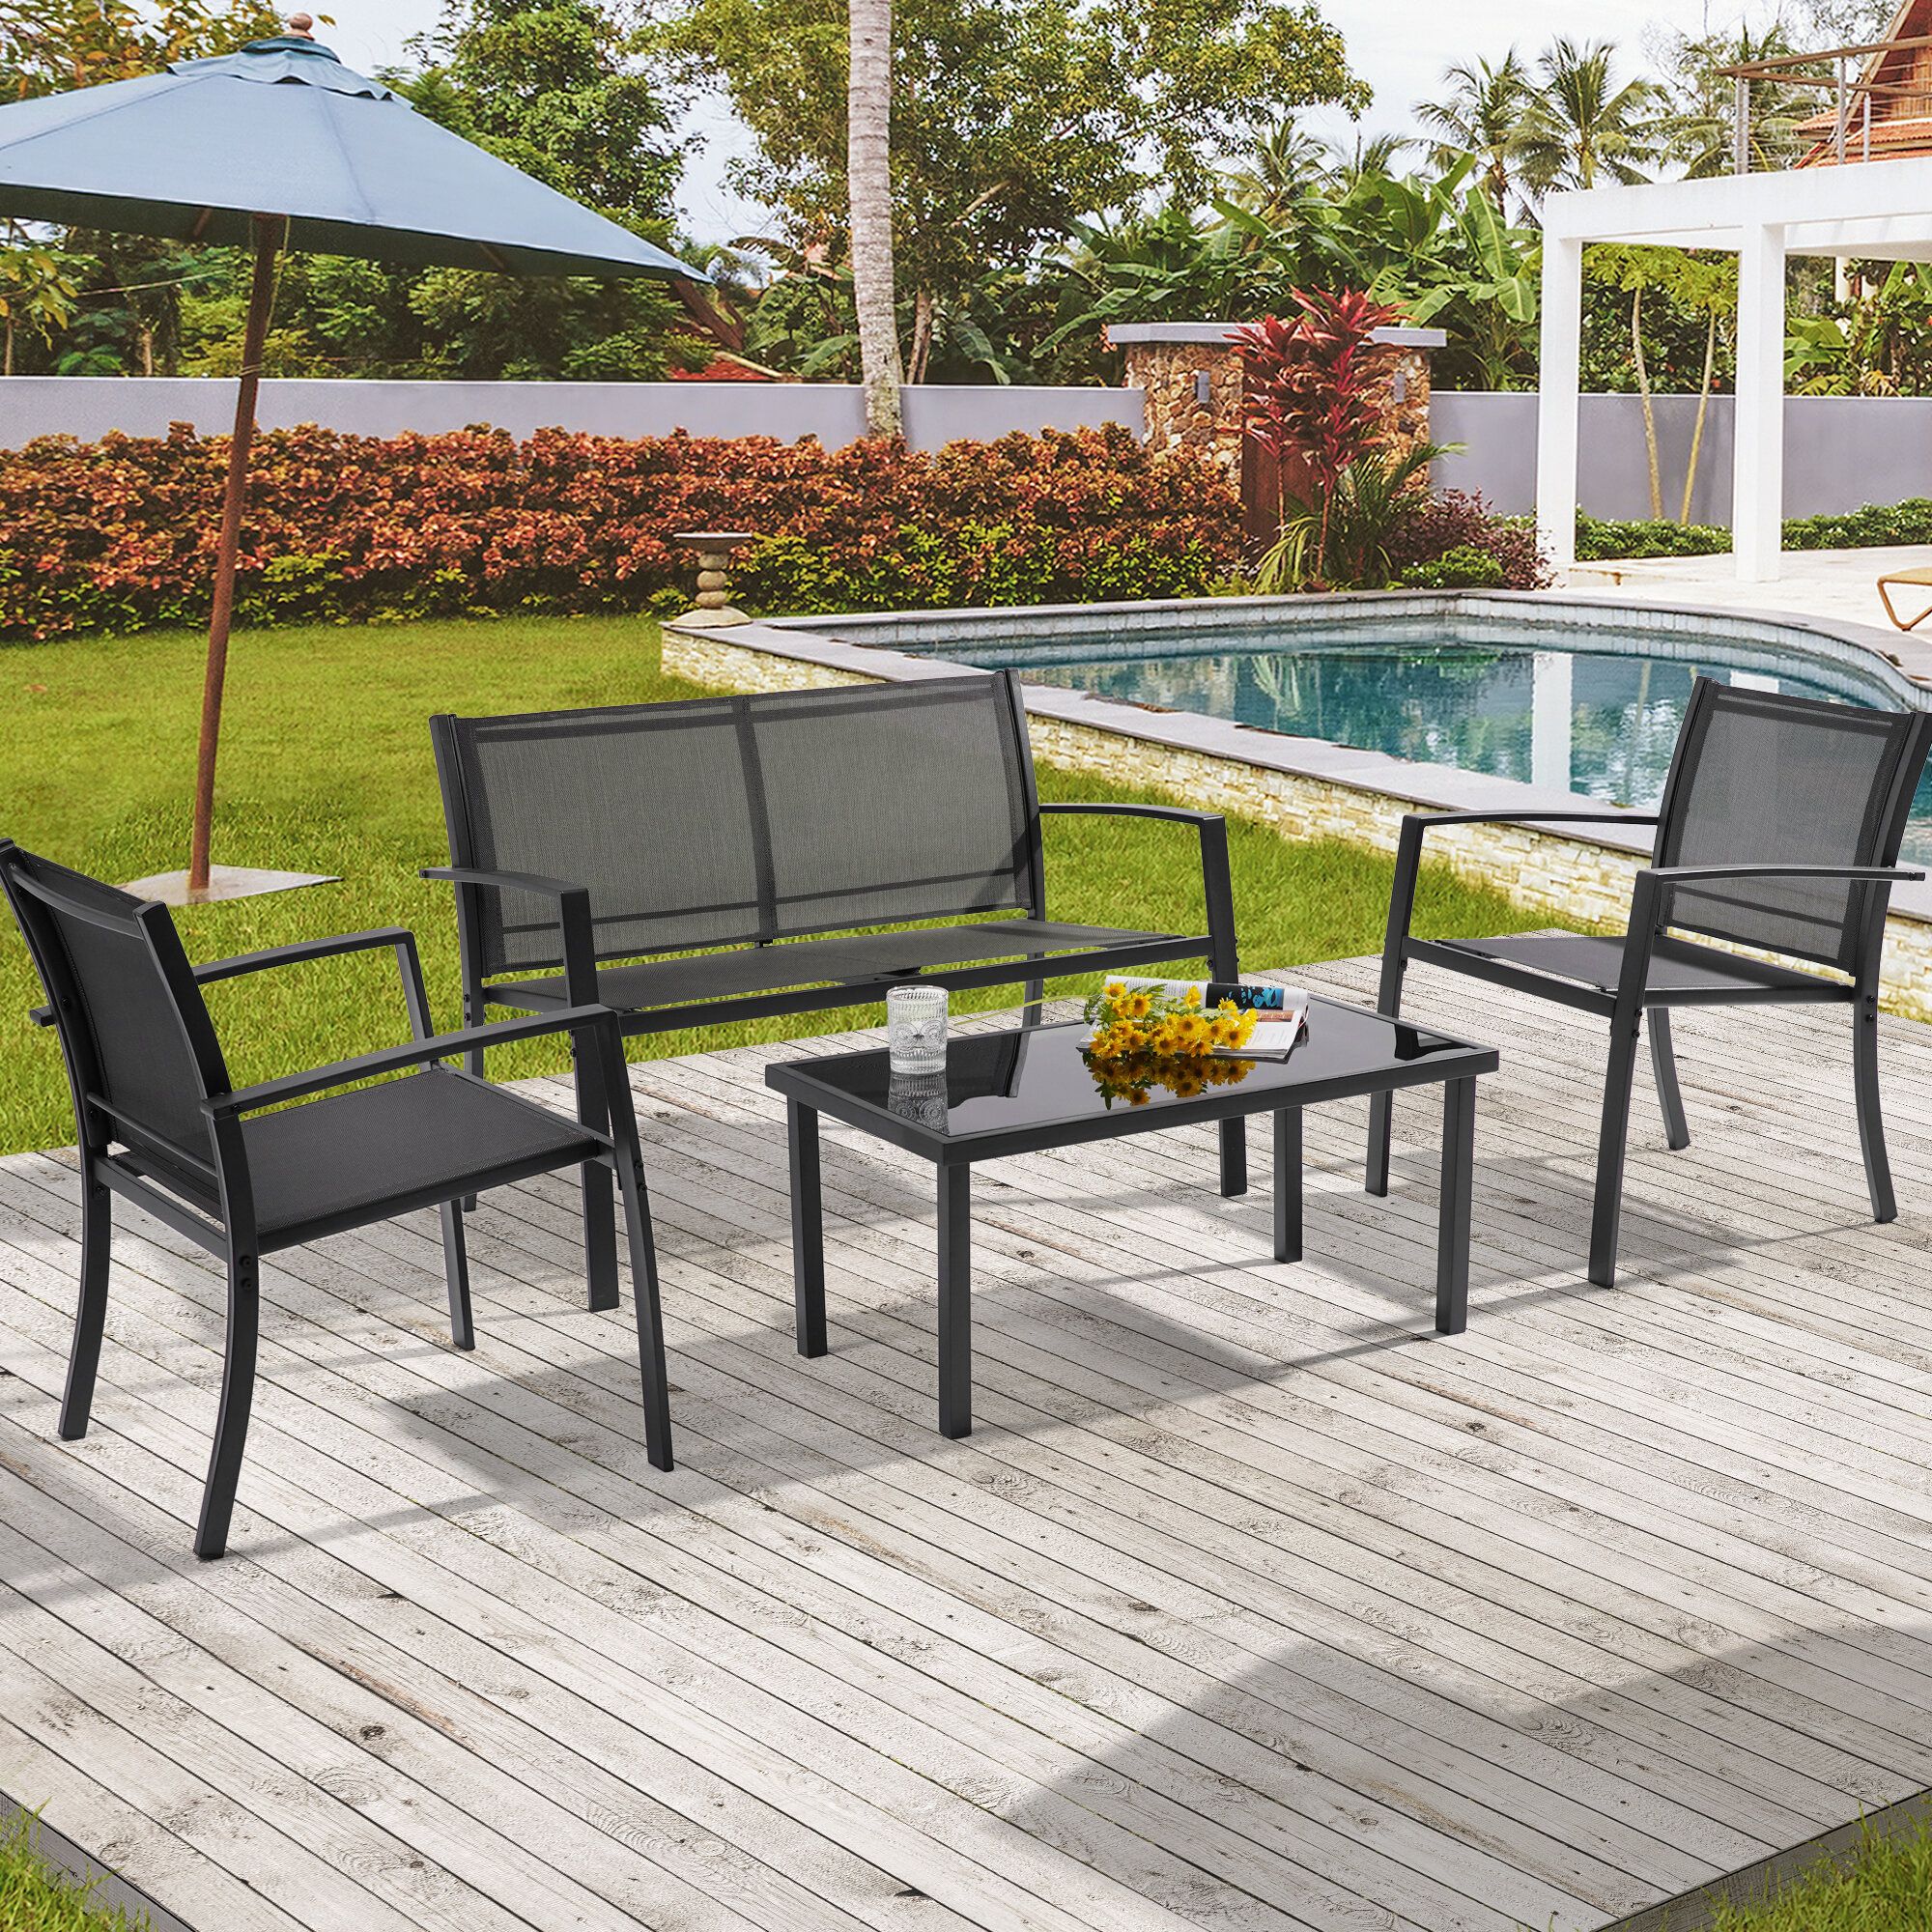 Missbrella All Weather Patio Furniture 4 Piece Chair Sets, Pvc Coated  Polyester Bistro Chairs With Loveseat And Coffee Table For Lawn, Deck And  Balcony | Wayfair Regarding Loveseat Chairs For Backyard (View 11 of 15)